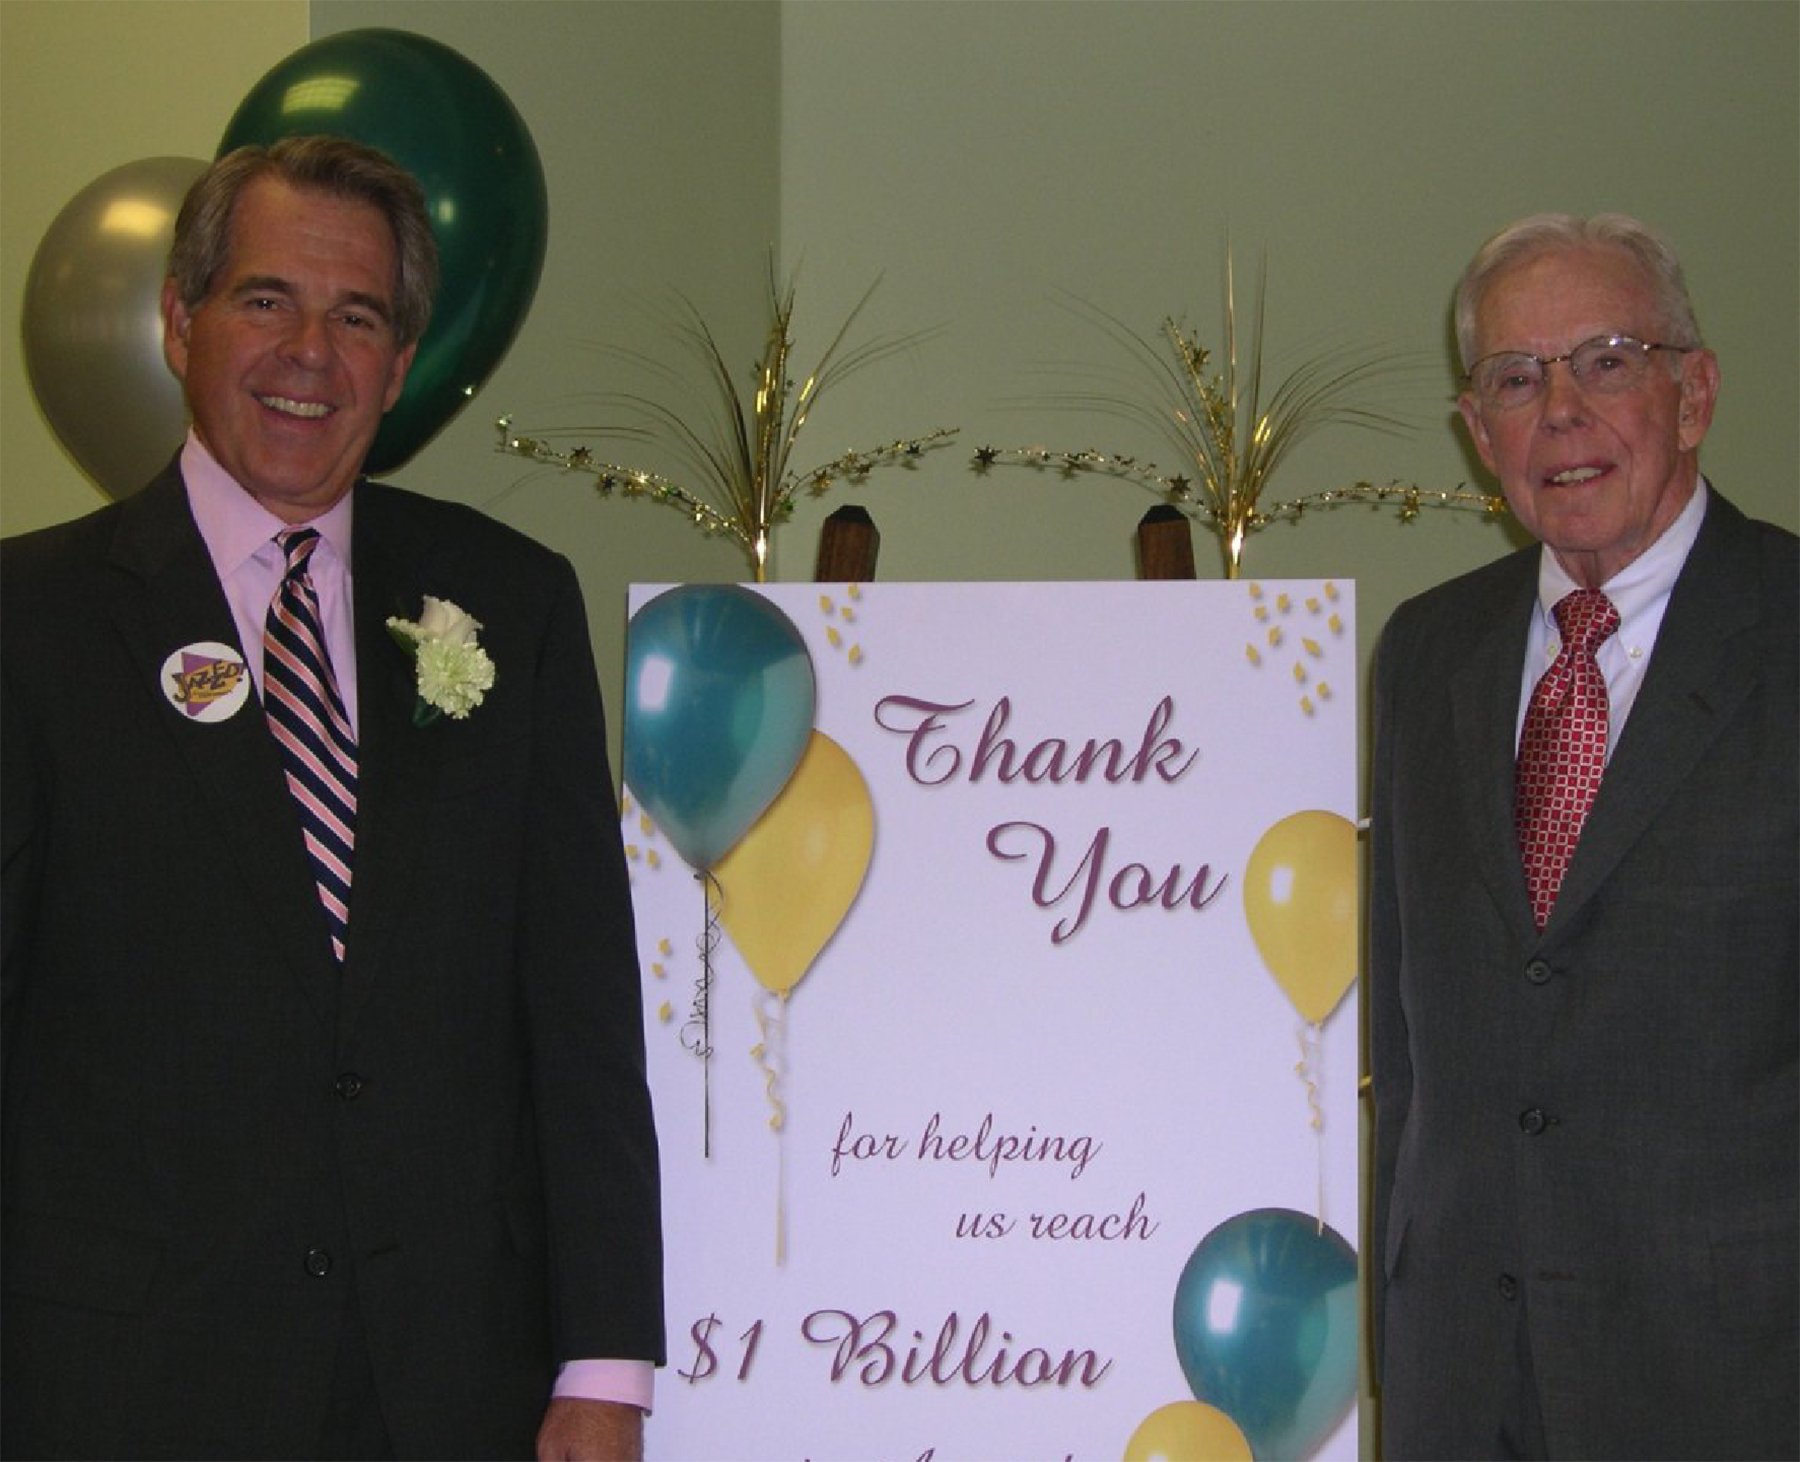 Illinois Mutual President Michel McCord and Chairman R.A. McCord celebrating $1 billion in assets.